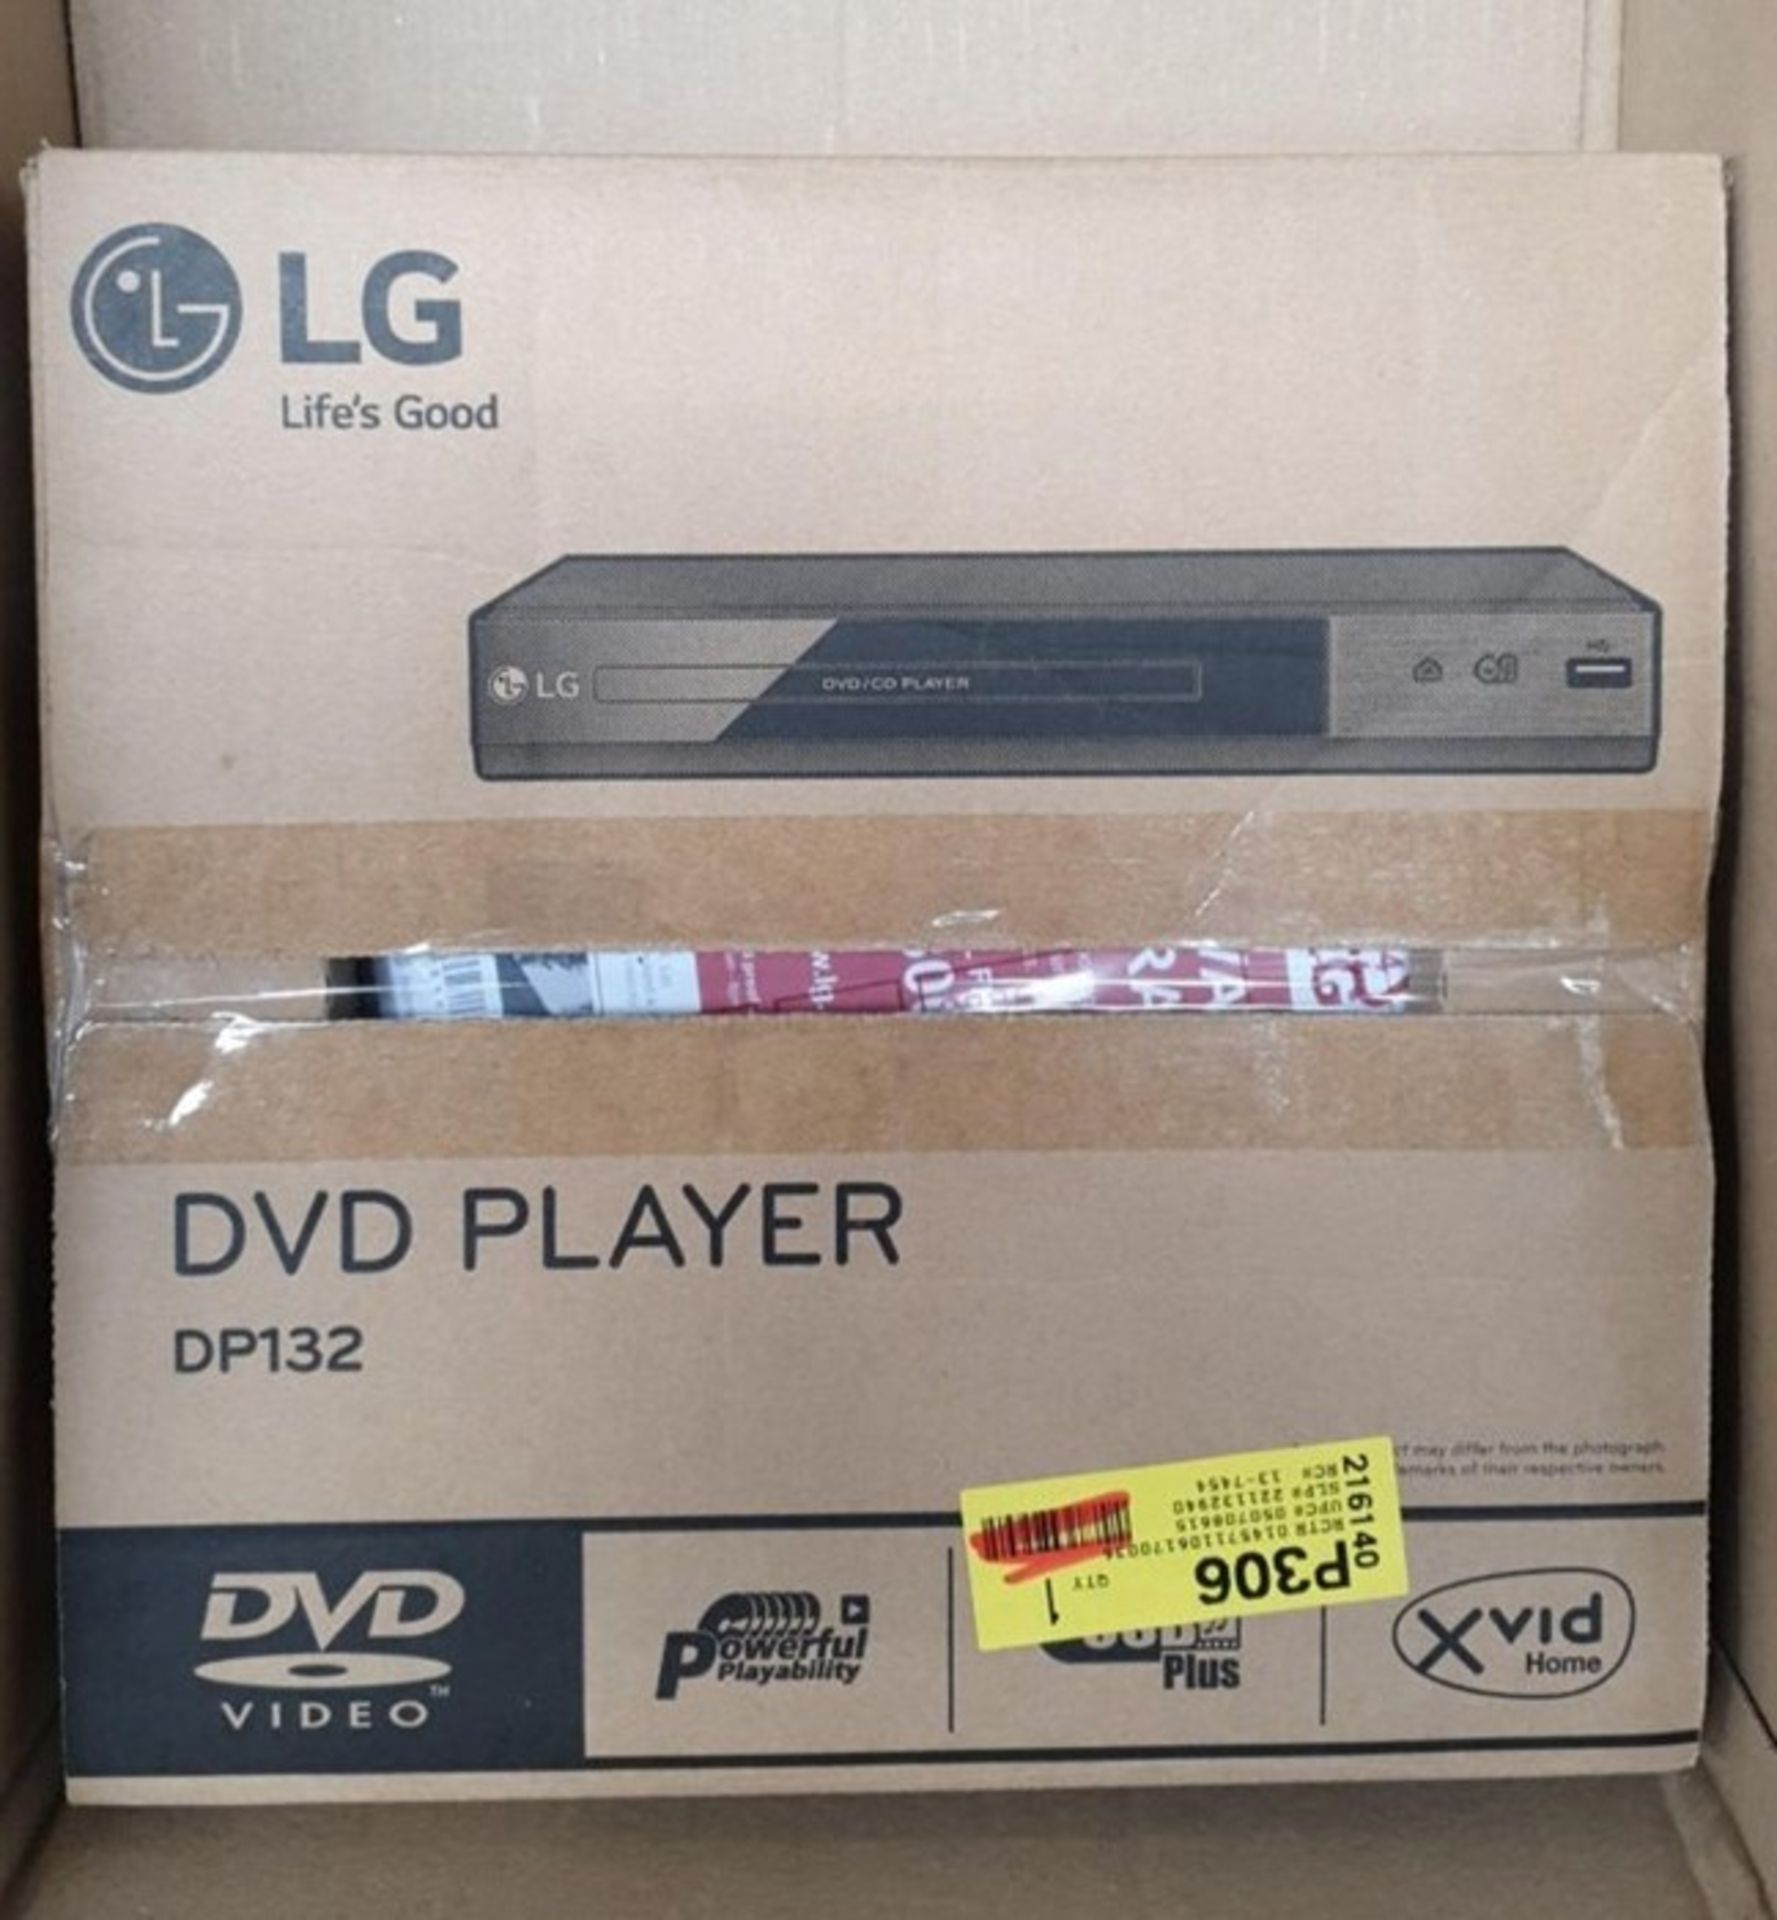 1 BOXED LG BLU-RAY DISC AND DVD PLAYER - BP250 - BL 6140 / RRP £55.00 (VIEWING HIGHLY RECOMMENDED)